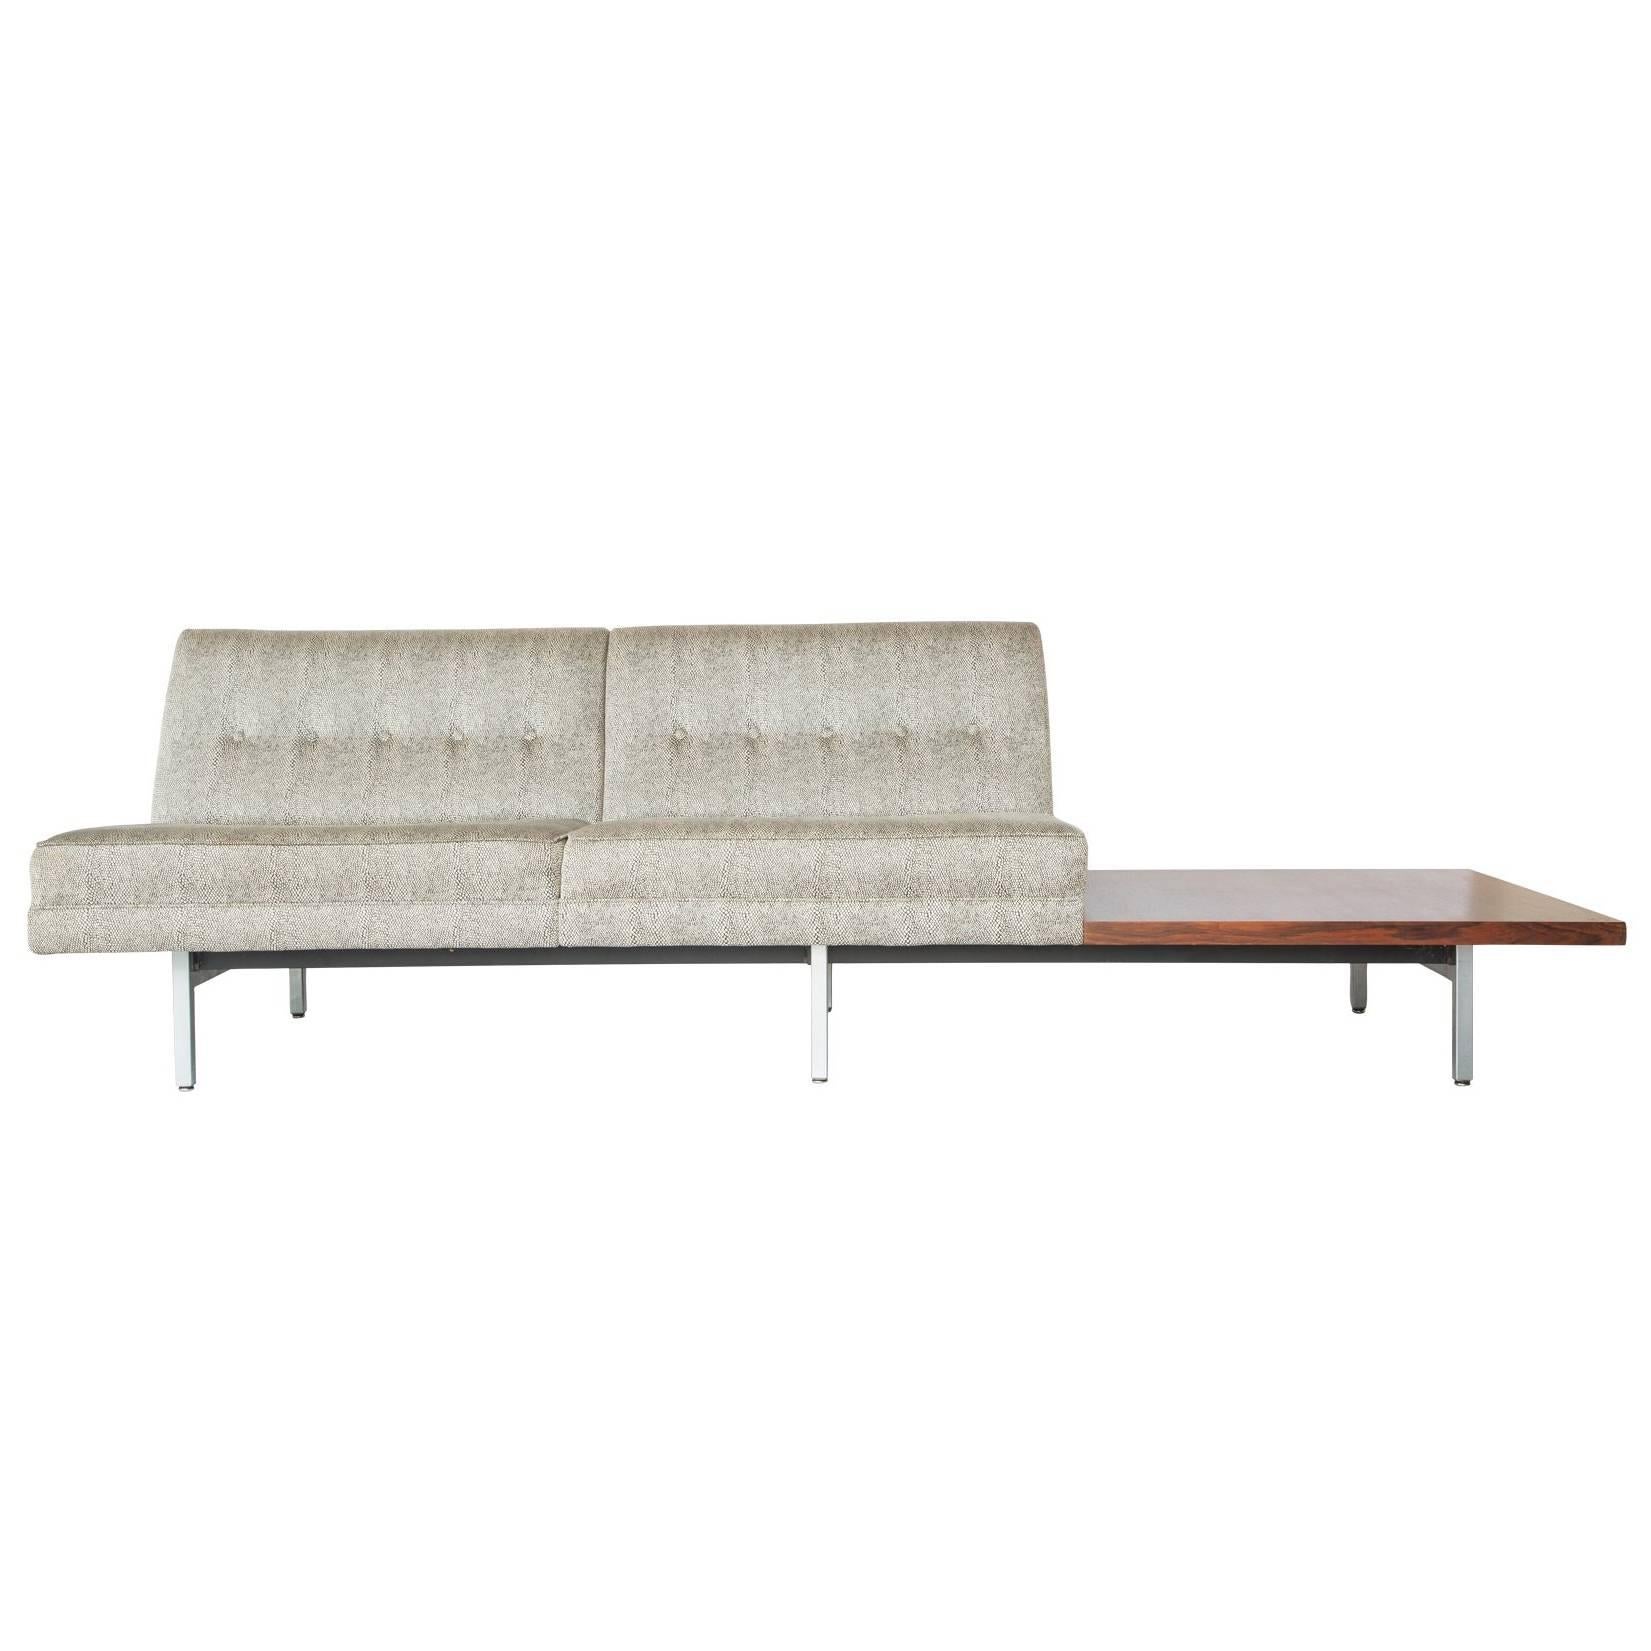 George Nelson Sofa with Rosewood Table for Herman Miller